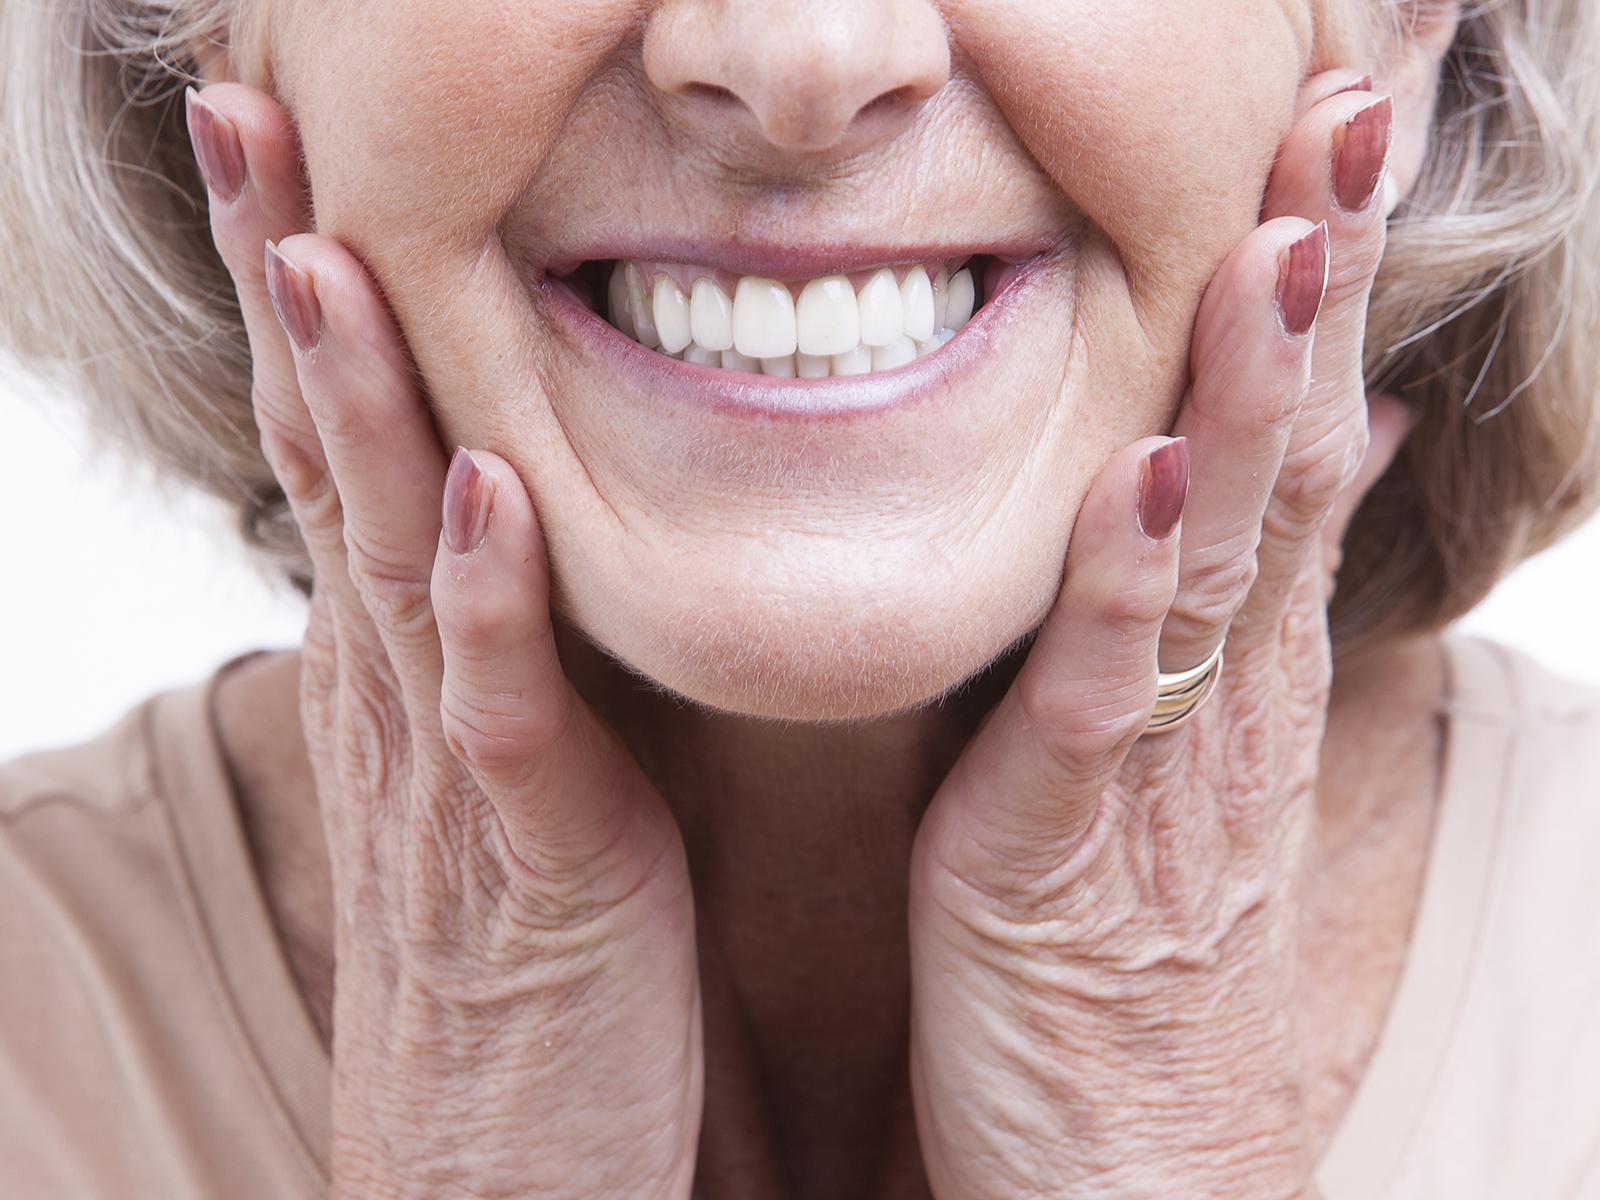 What to expect when wearing dentures for the first time?